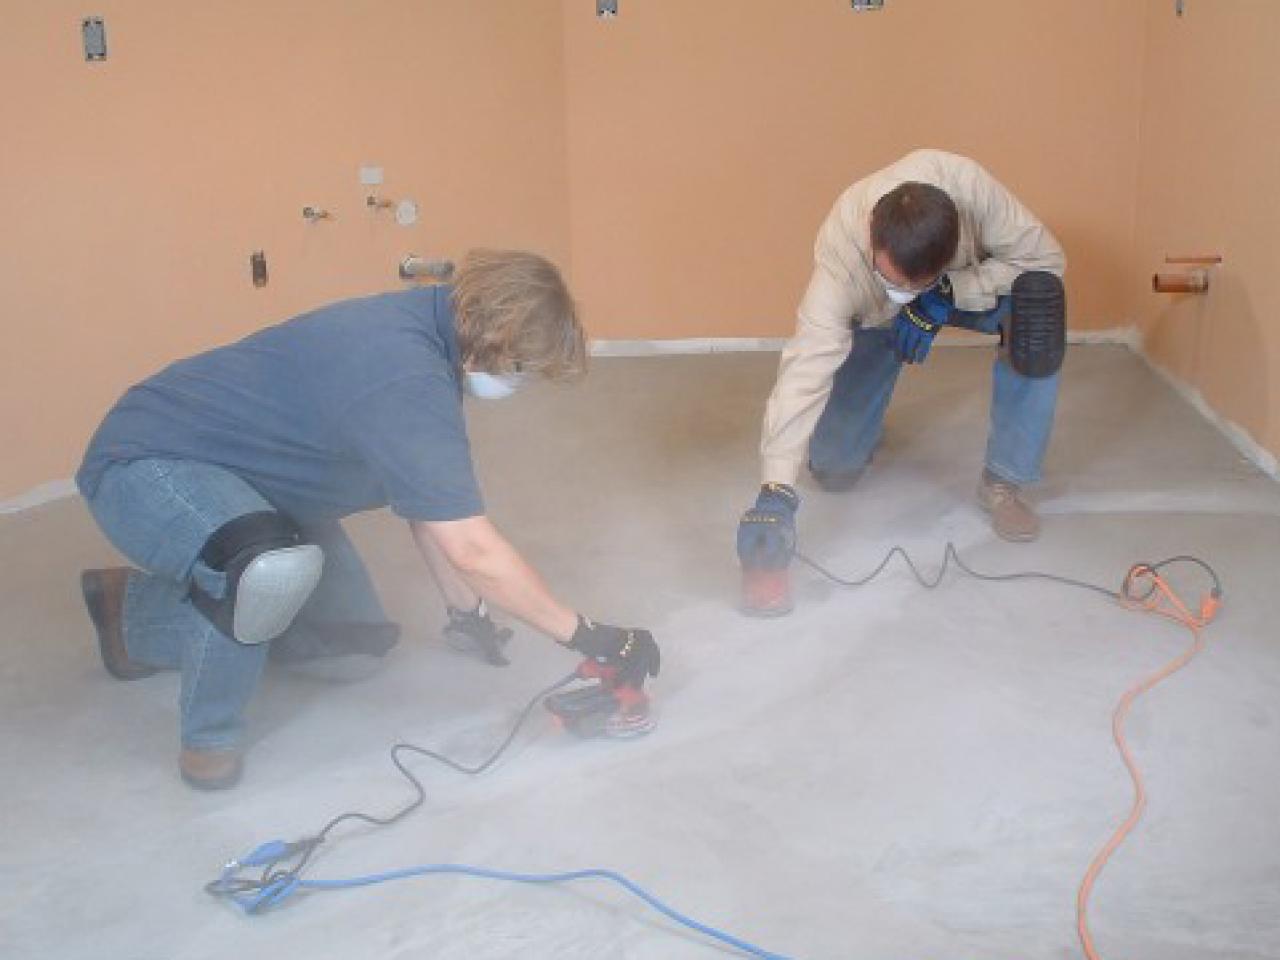 How To Install Vinyl Tile Flooring, How To Install Vinyl Flooring Tiles On Concrete